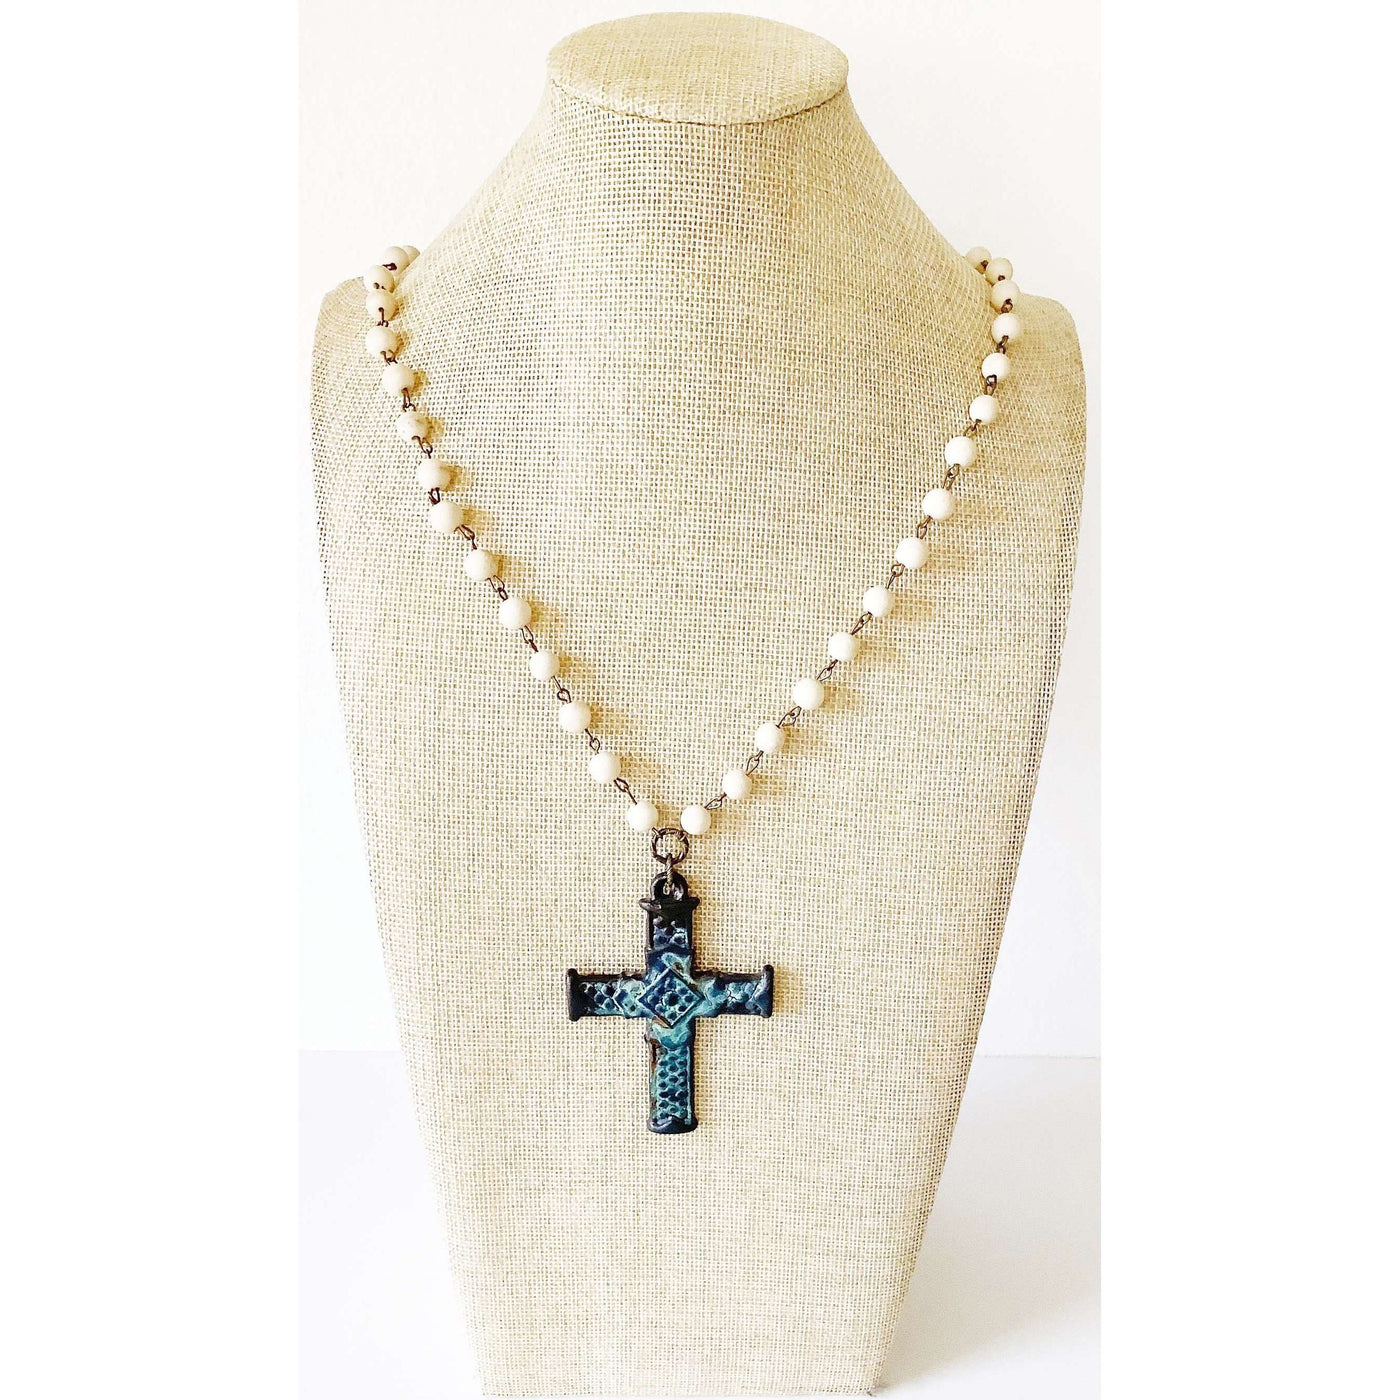 Rustic cross with genuine stones necklace - Little Prairie Girl